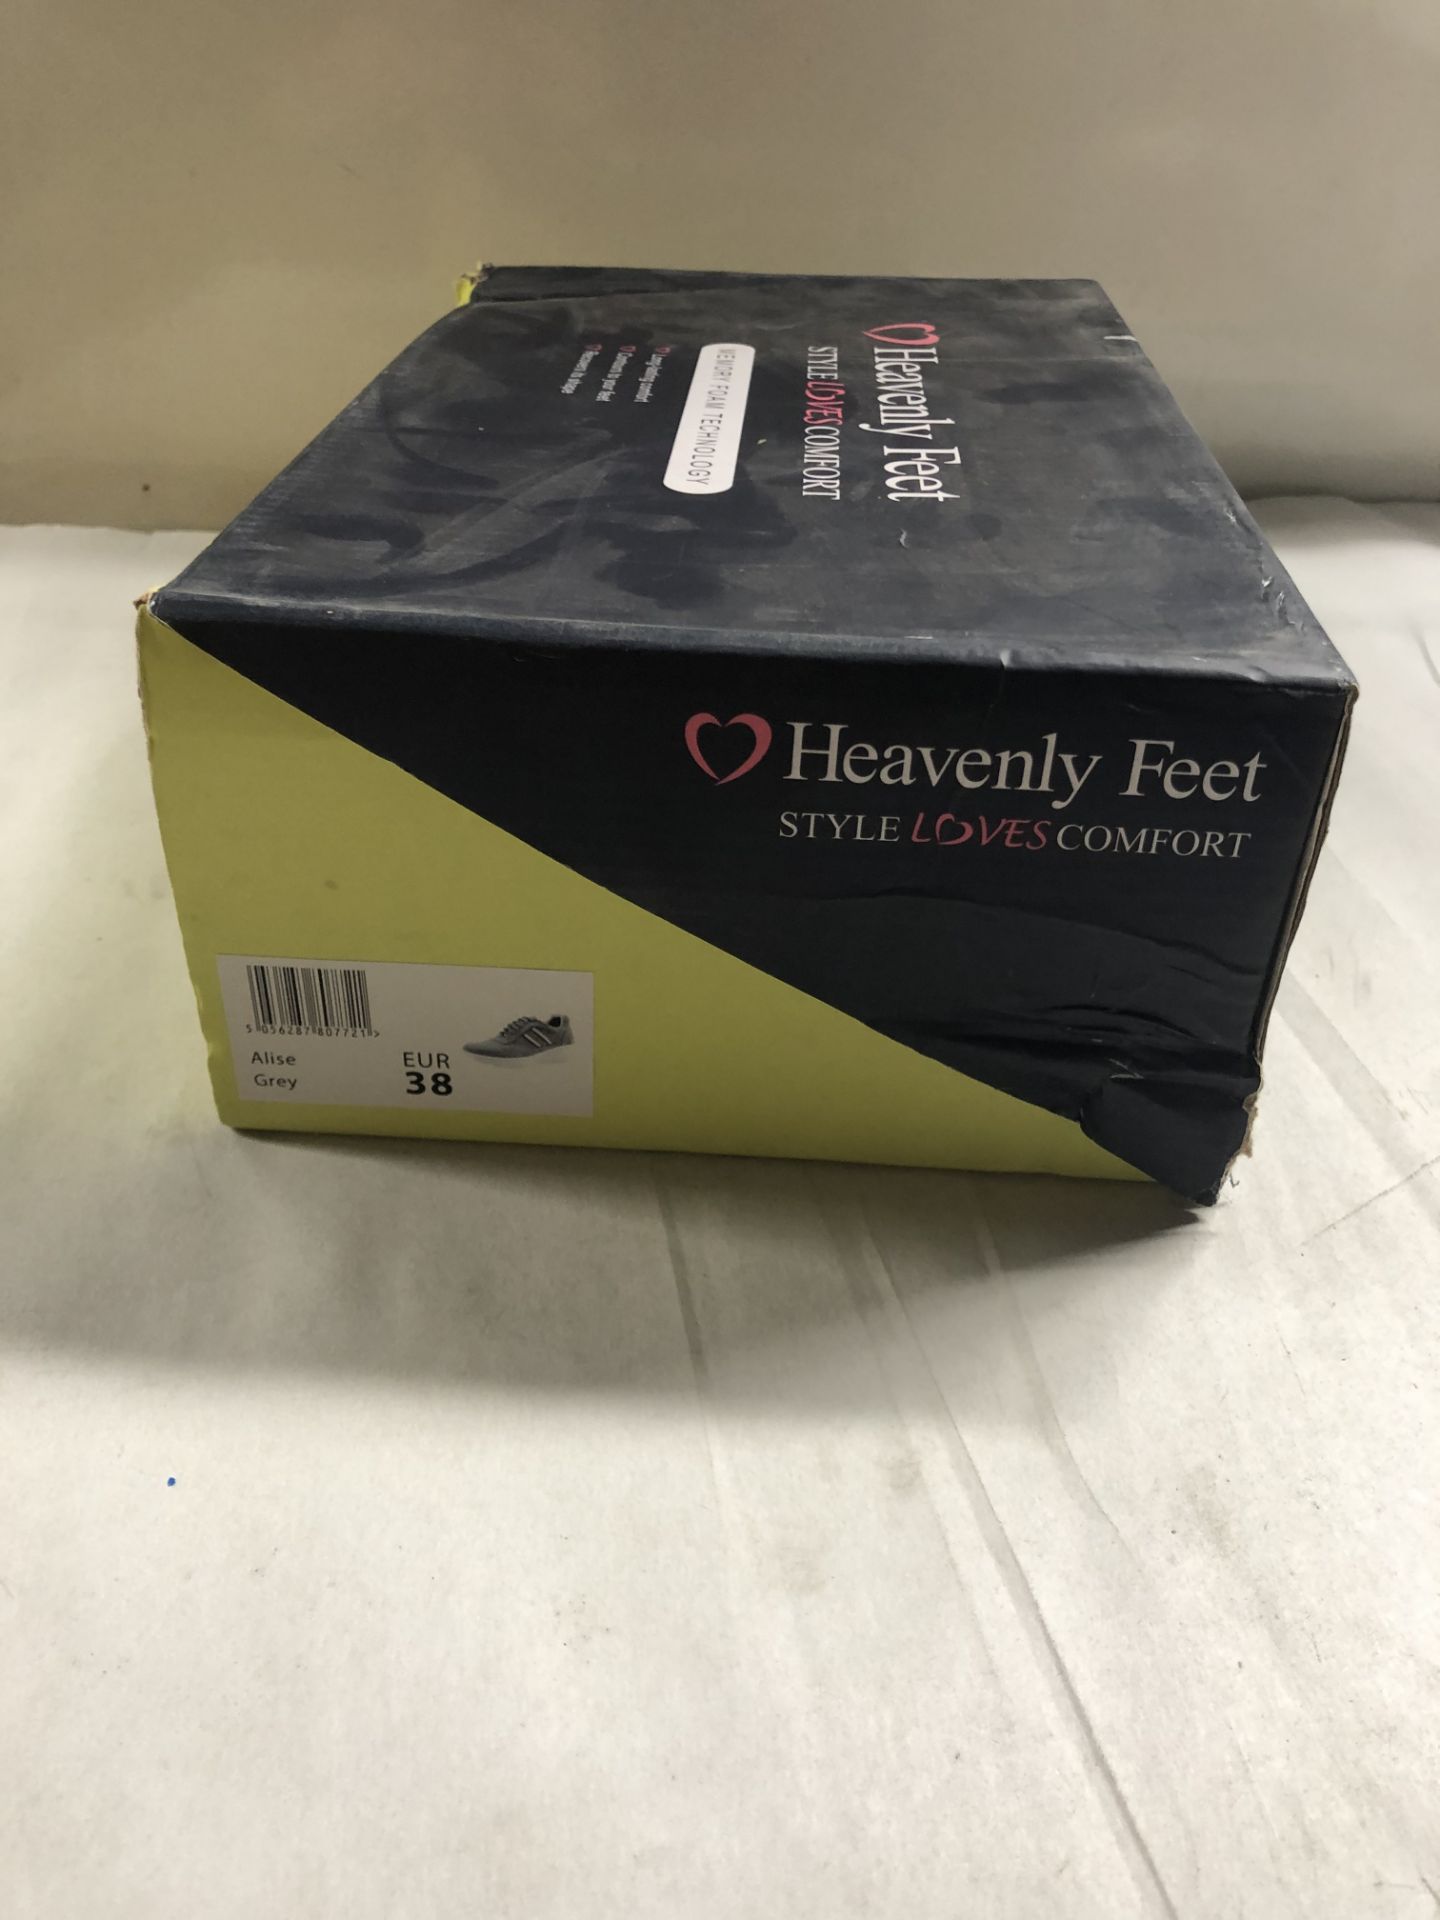 Heavenly Feet Trainers. Eur 38 - Image 4 of 4